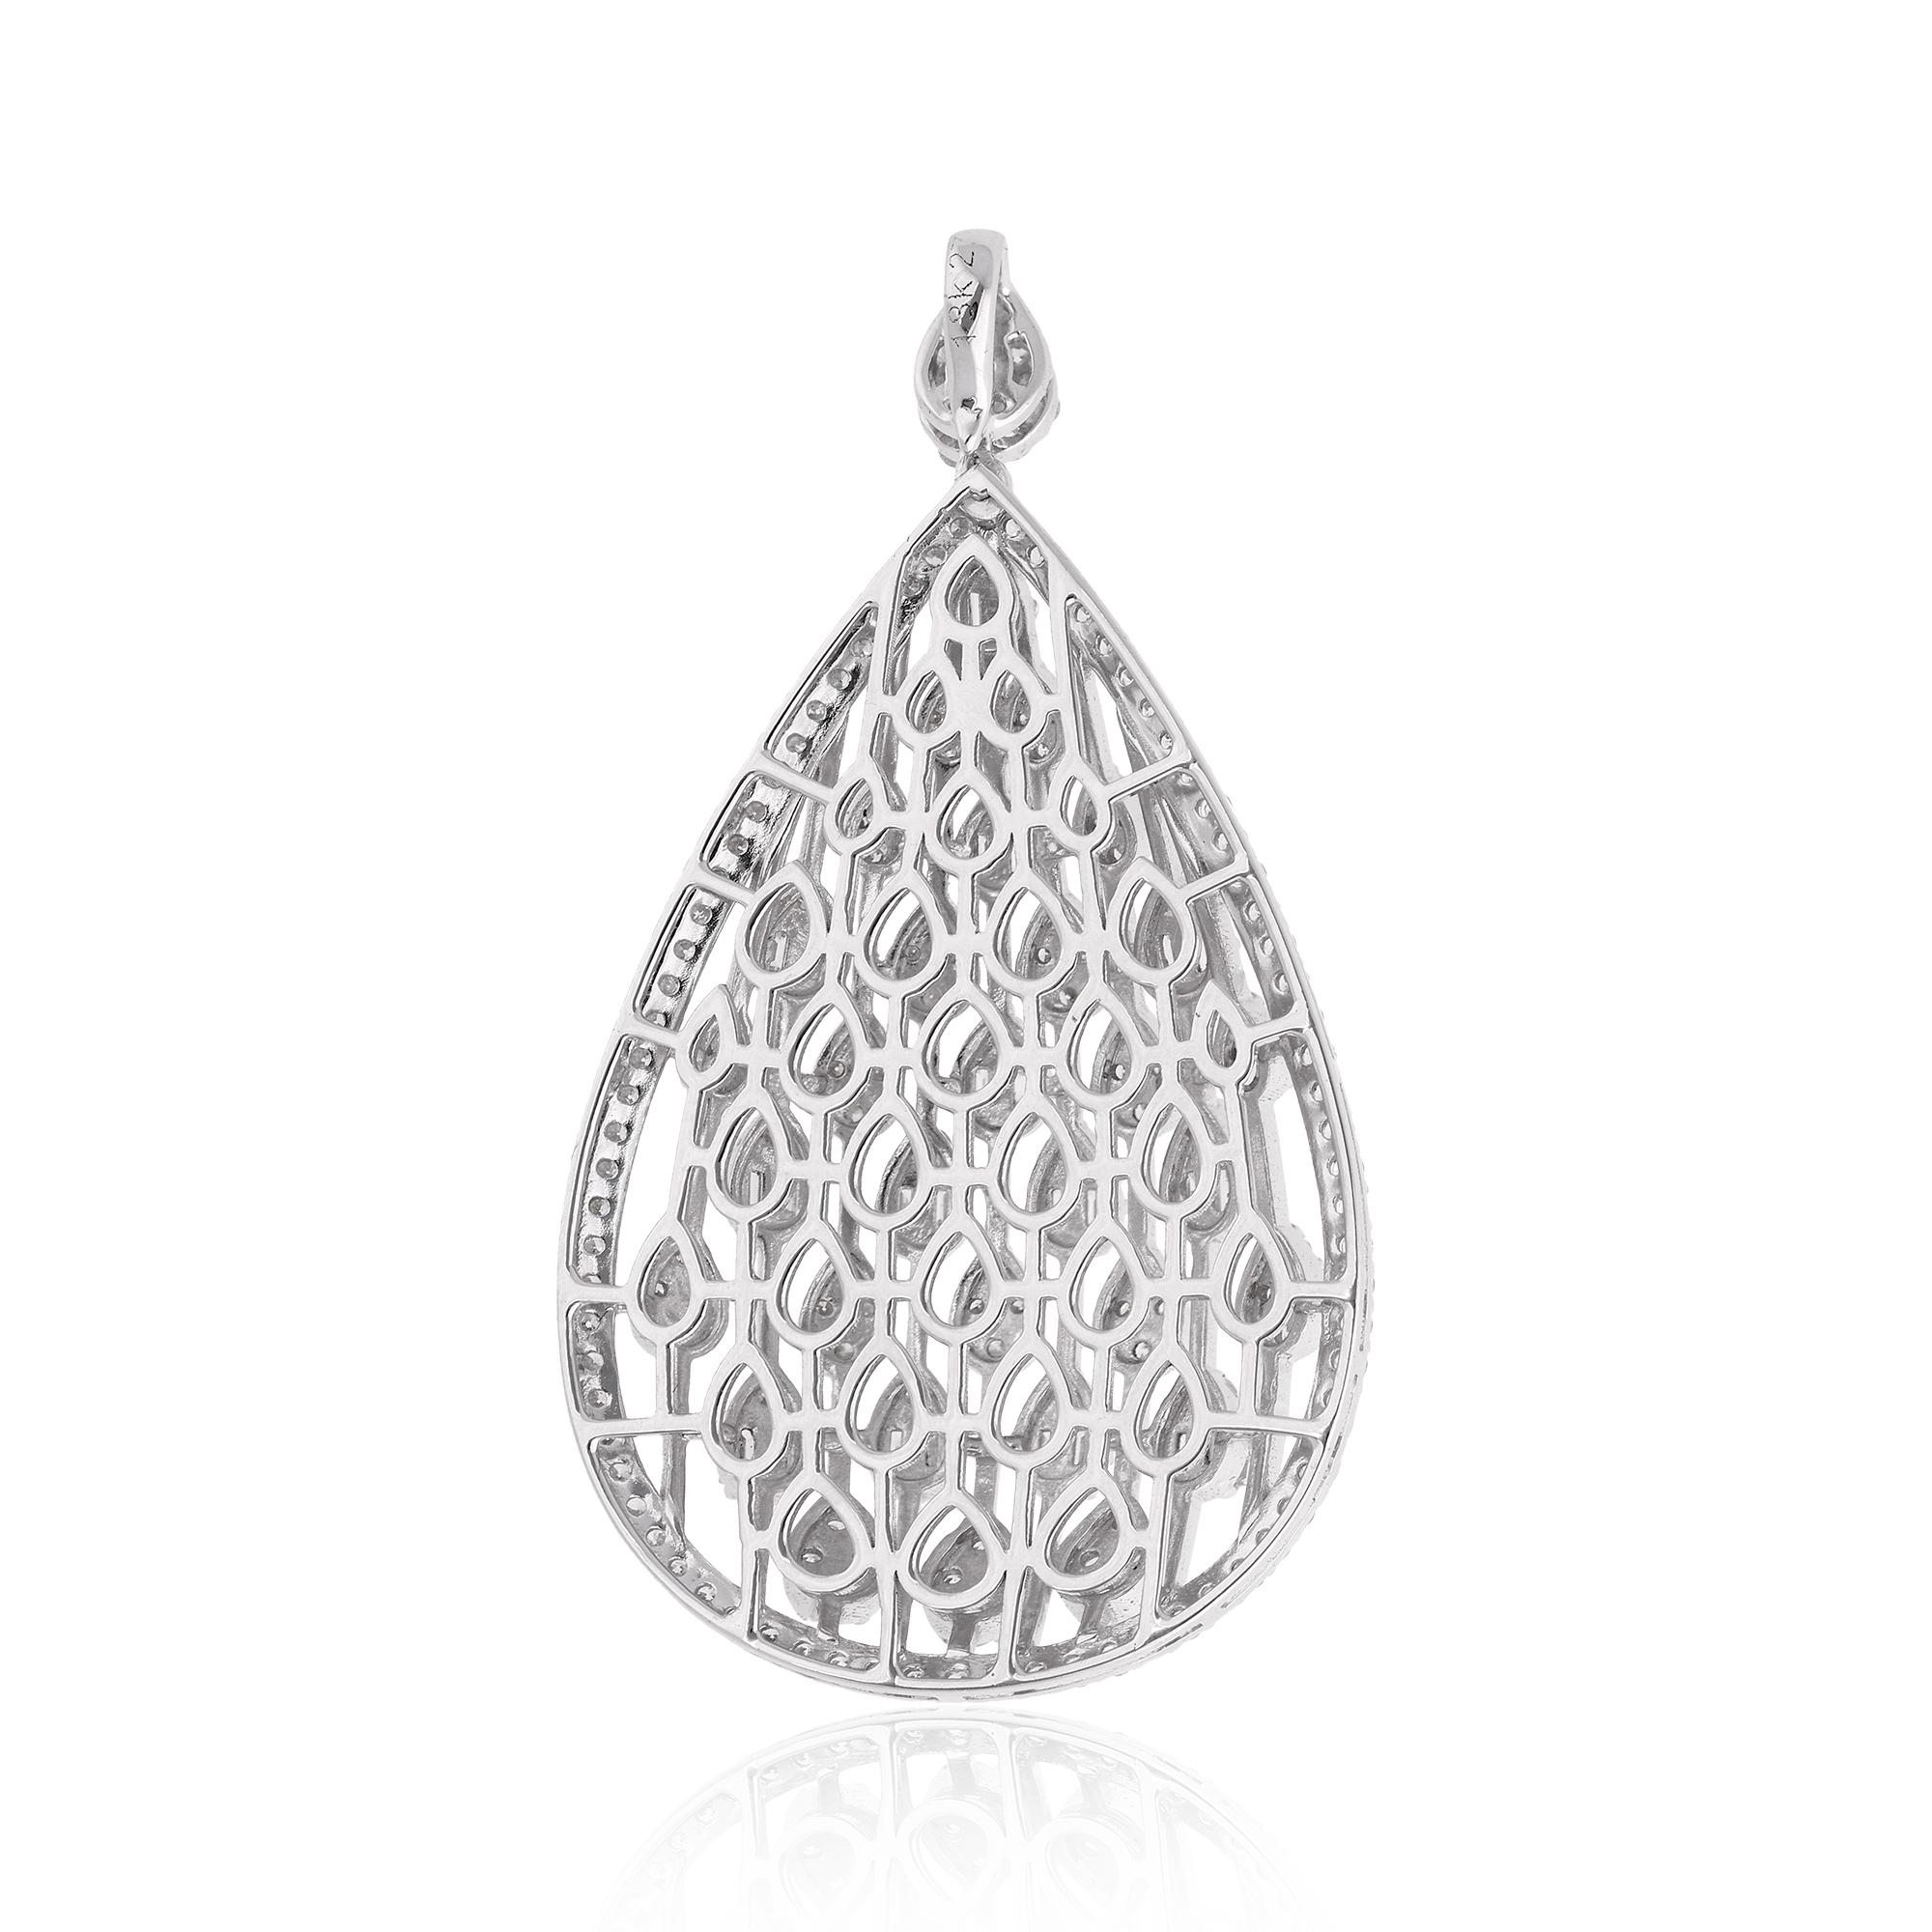 Item Code :- SEPD-3668 (14k)
Gross Wt. :- 14.07 gm
14k Solid White Gold Wt. :- 13.69 gm
Natural Diamond Wt. :- 1.87 Ct. (AVERAGE DIAMOND CLARITY SI1-SI2 AND COLOR H-I)
Pendant Size :- 41 mm approx.

✦ Sizing
.....................
We can adjust most